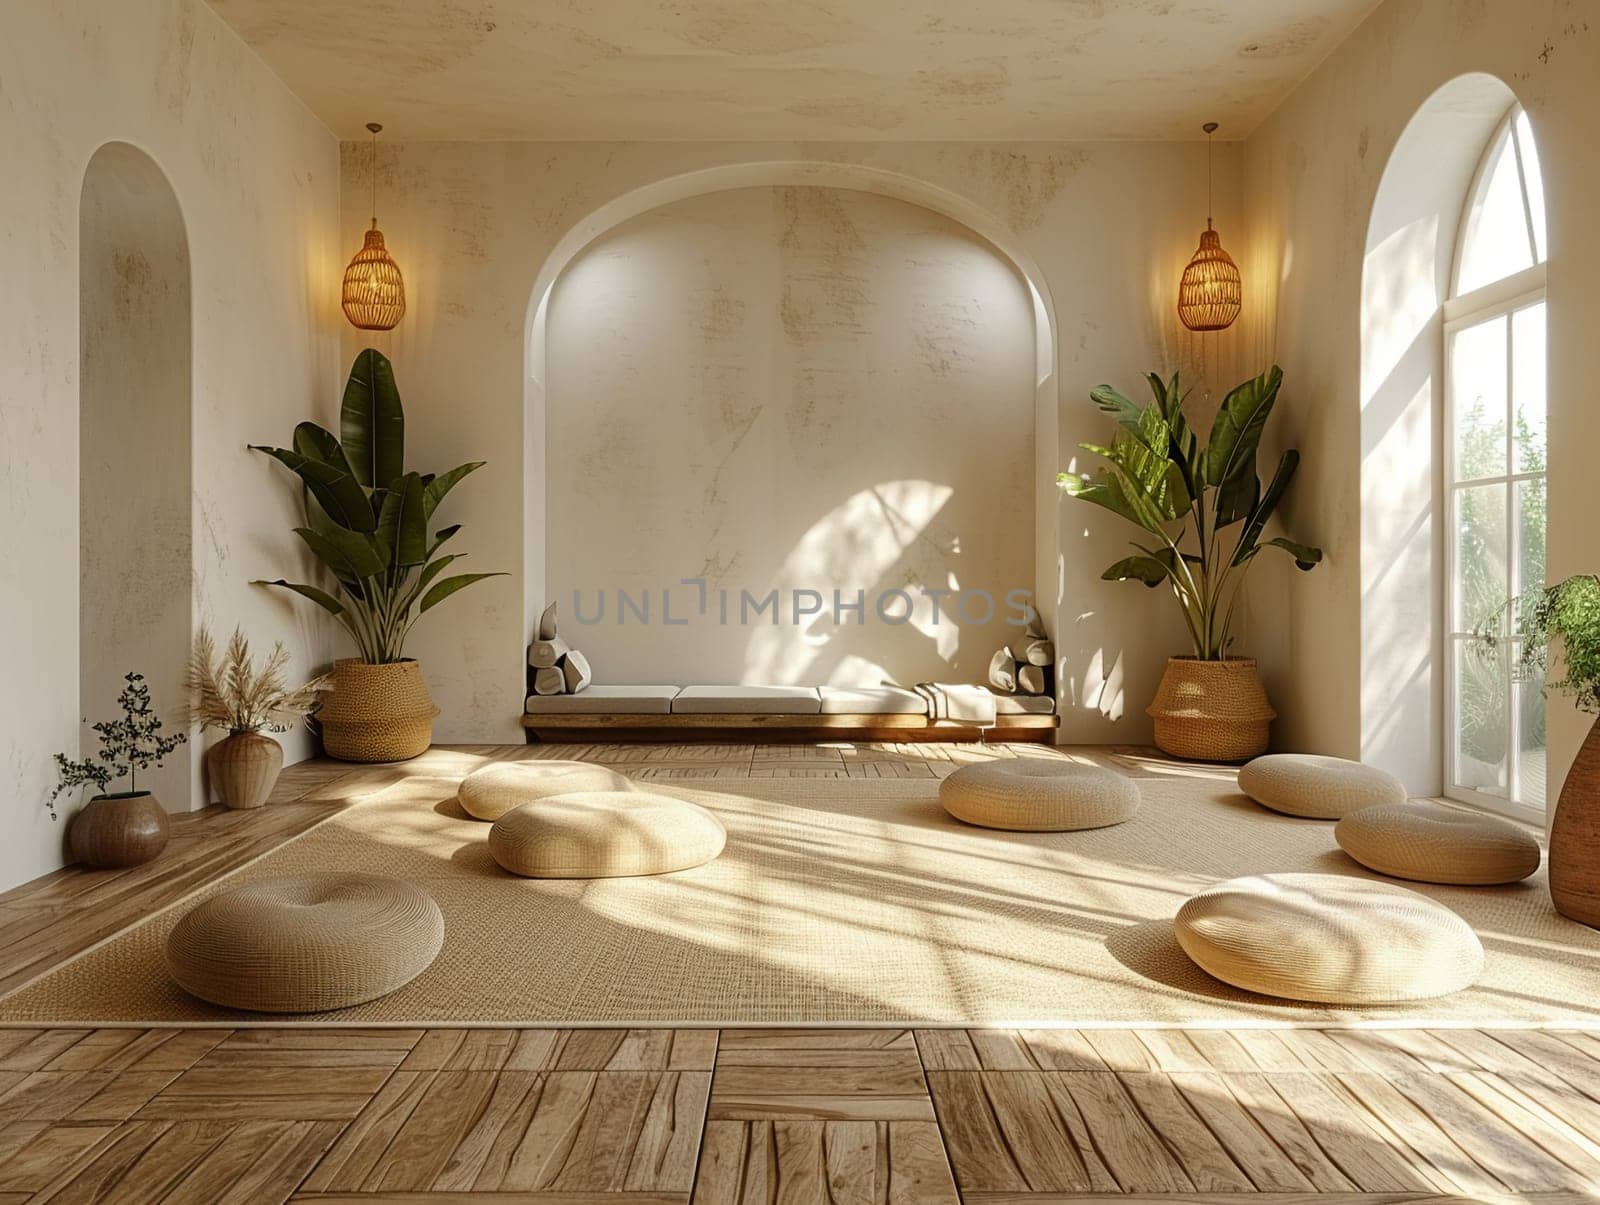 Peaceful yoga studio with natural wood floors and calming colorsHyperrealistic